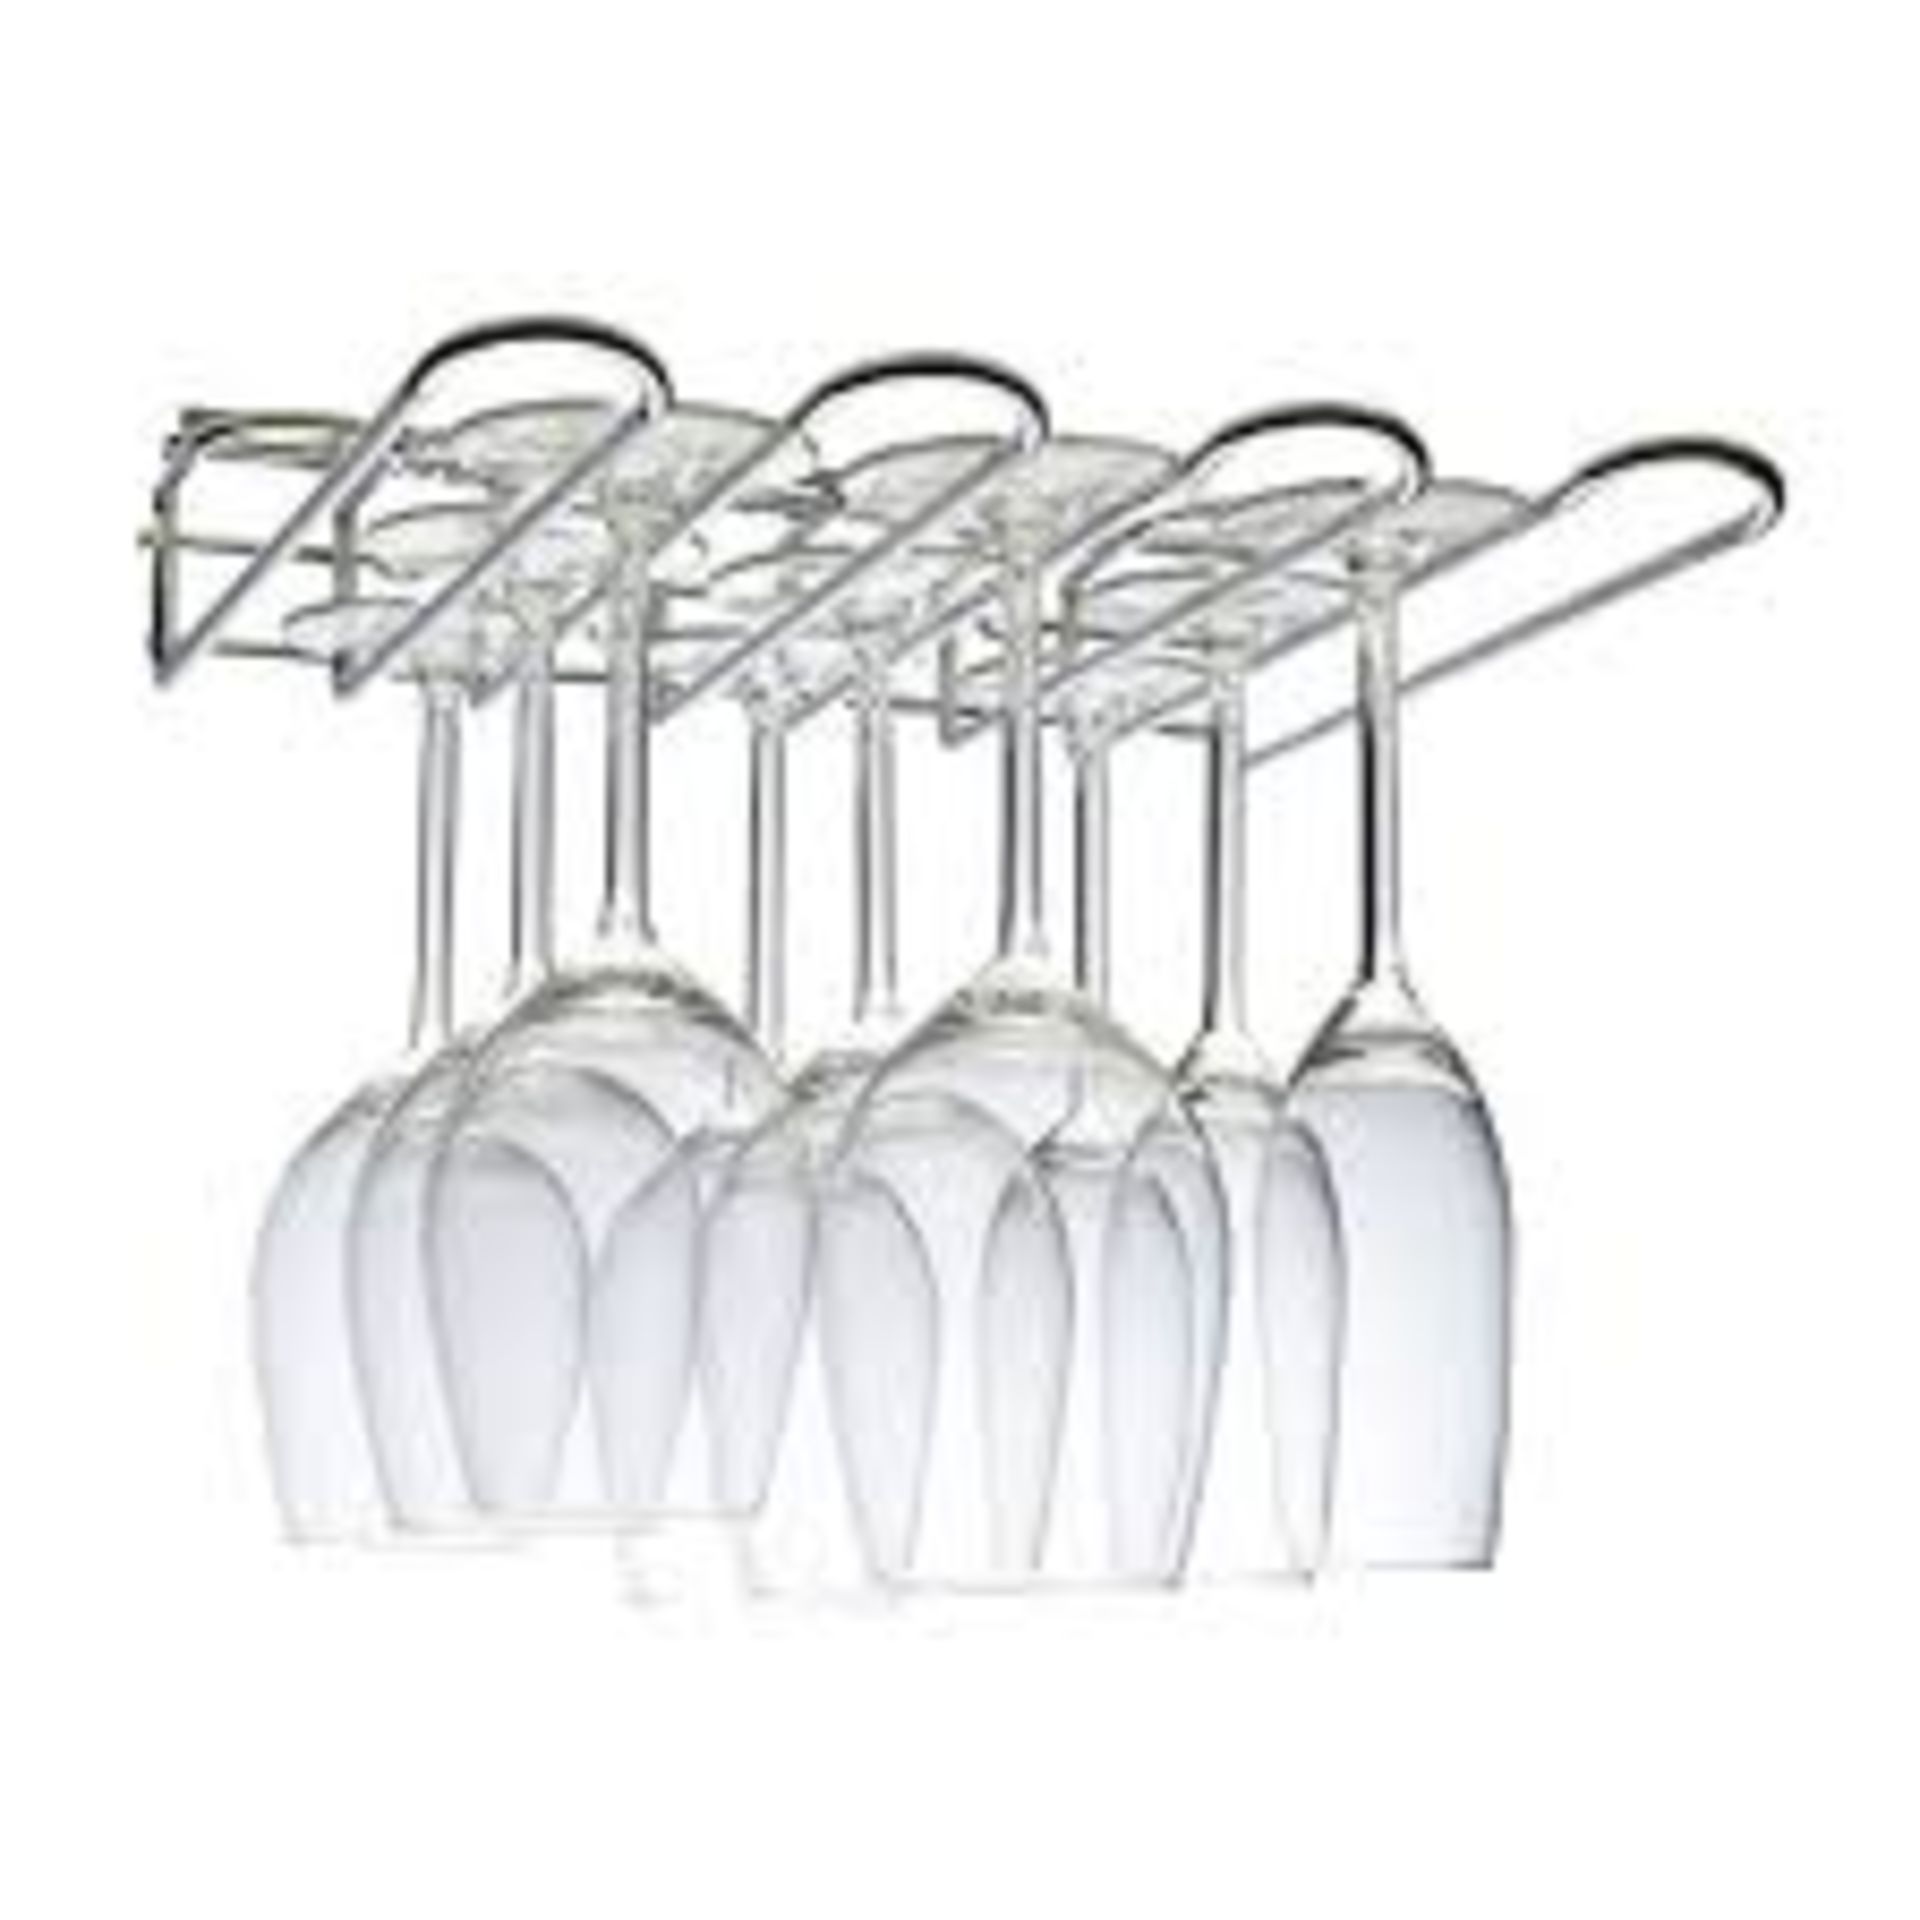 Lot To Contain 3 Three Row Metro Wine Racks Combined RRP £75 (16253) (10.1.20) (Public Viewing and